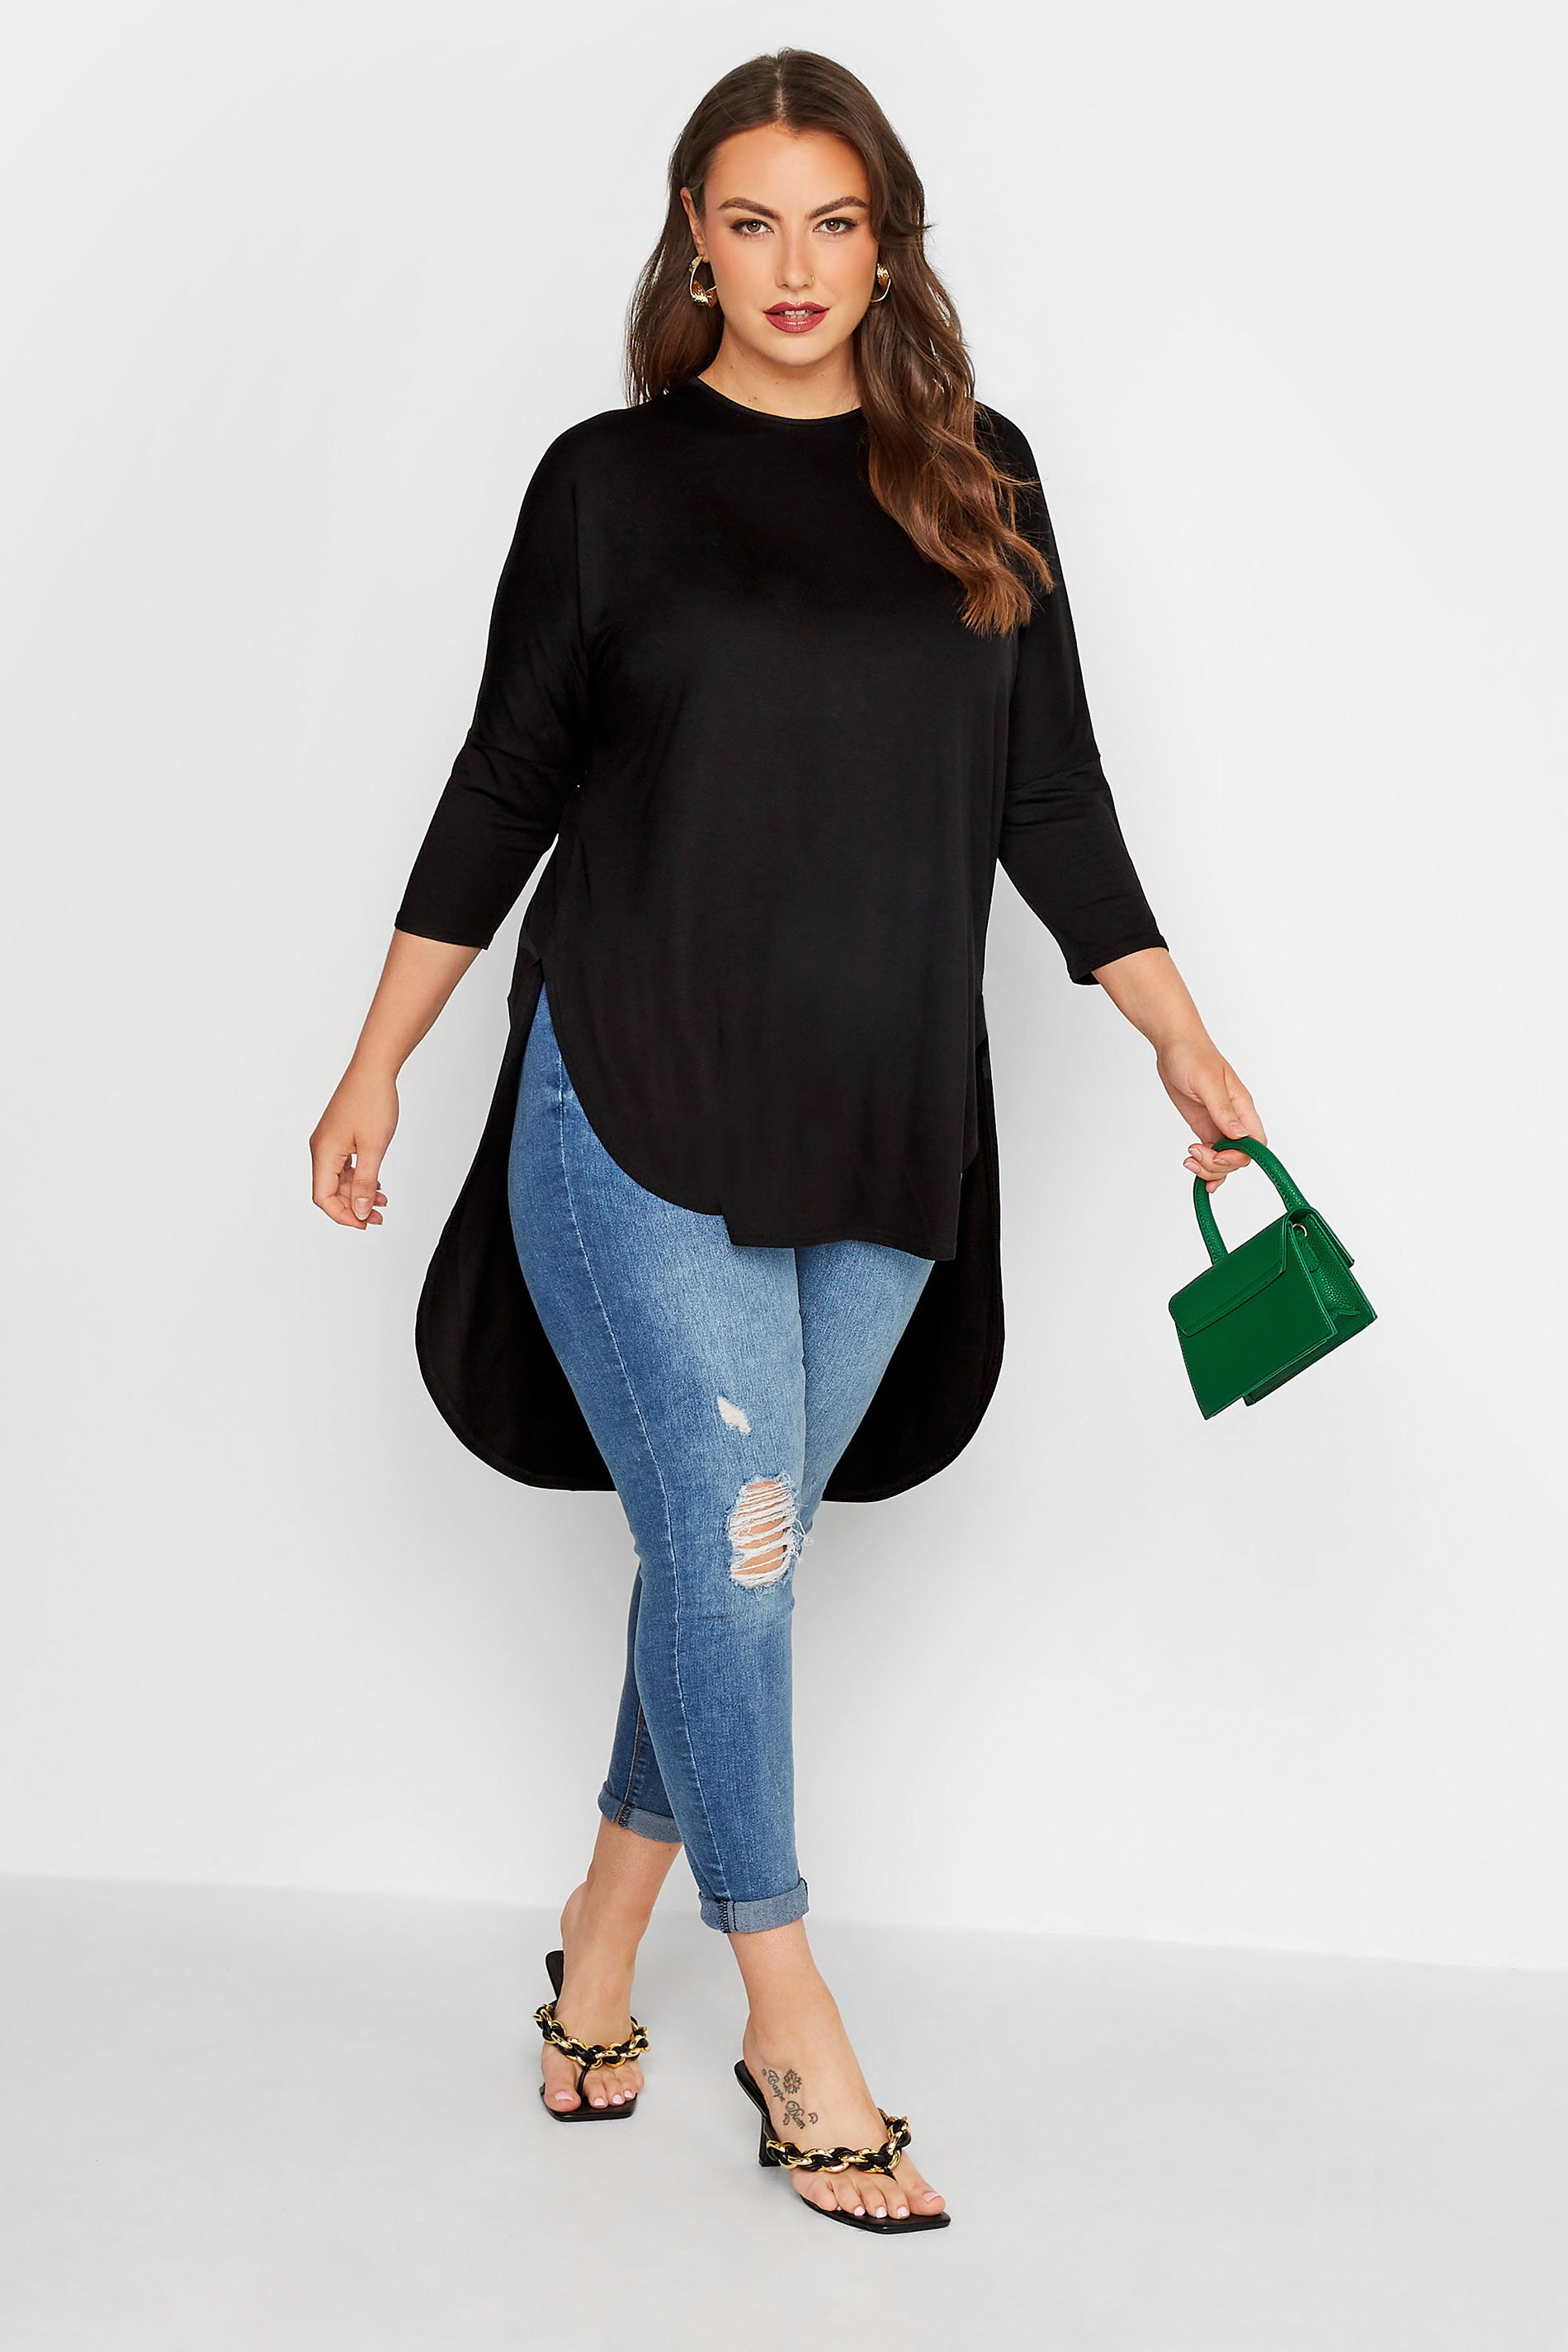 Grande taille  Tops Grande taille  Tops Ourlet Plongeant | LIMITED COLLECTION - T-Shirt Noir Manches Longues Ourlet Plongeant - QF14236